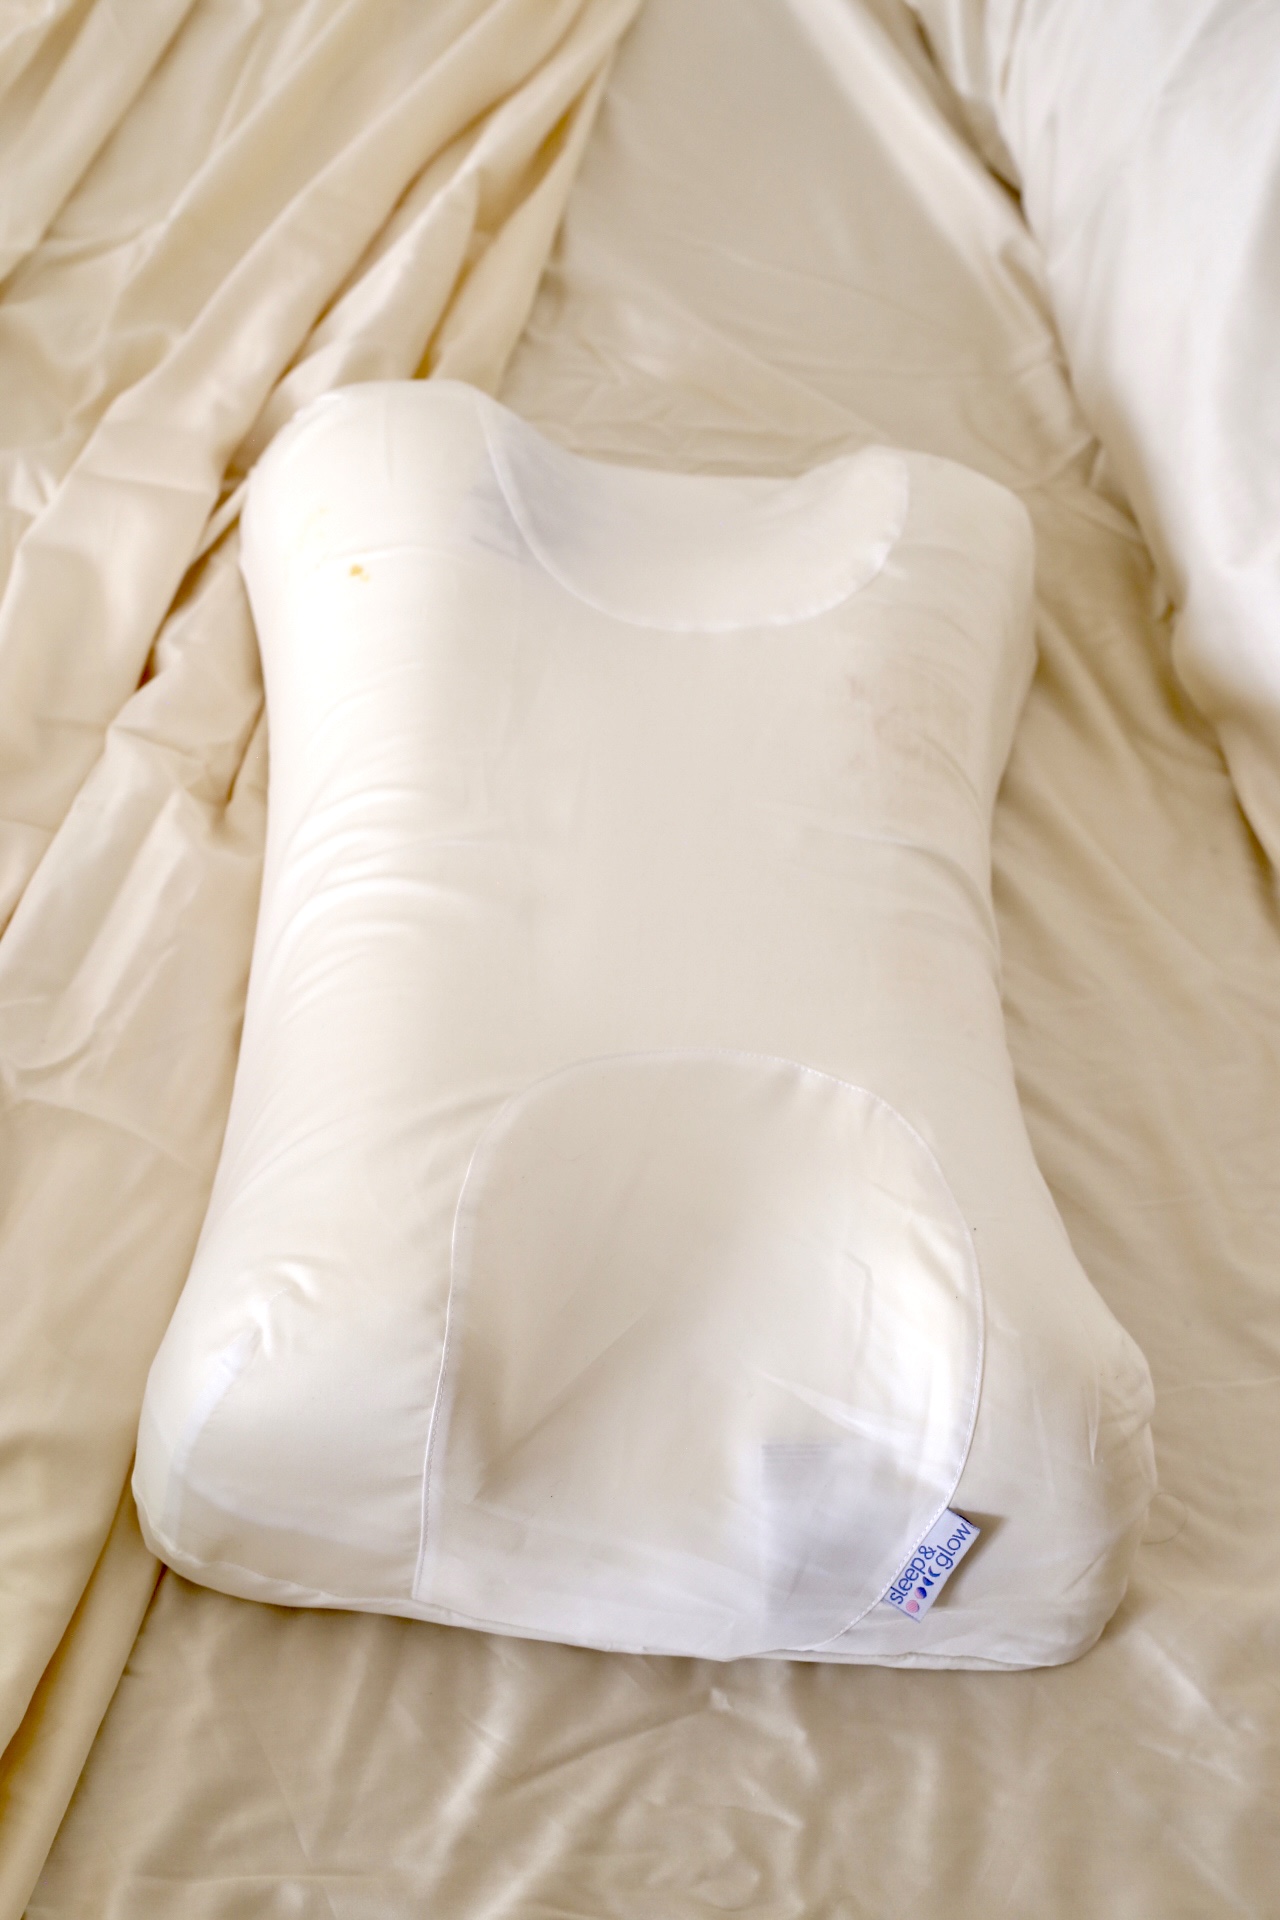 My Honest Review of Sleep & Glow Pillow: Yay or Nay?